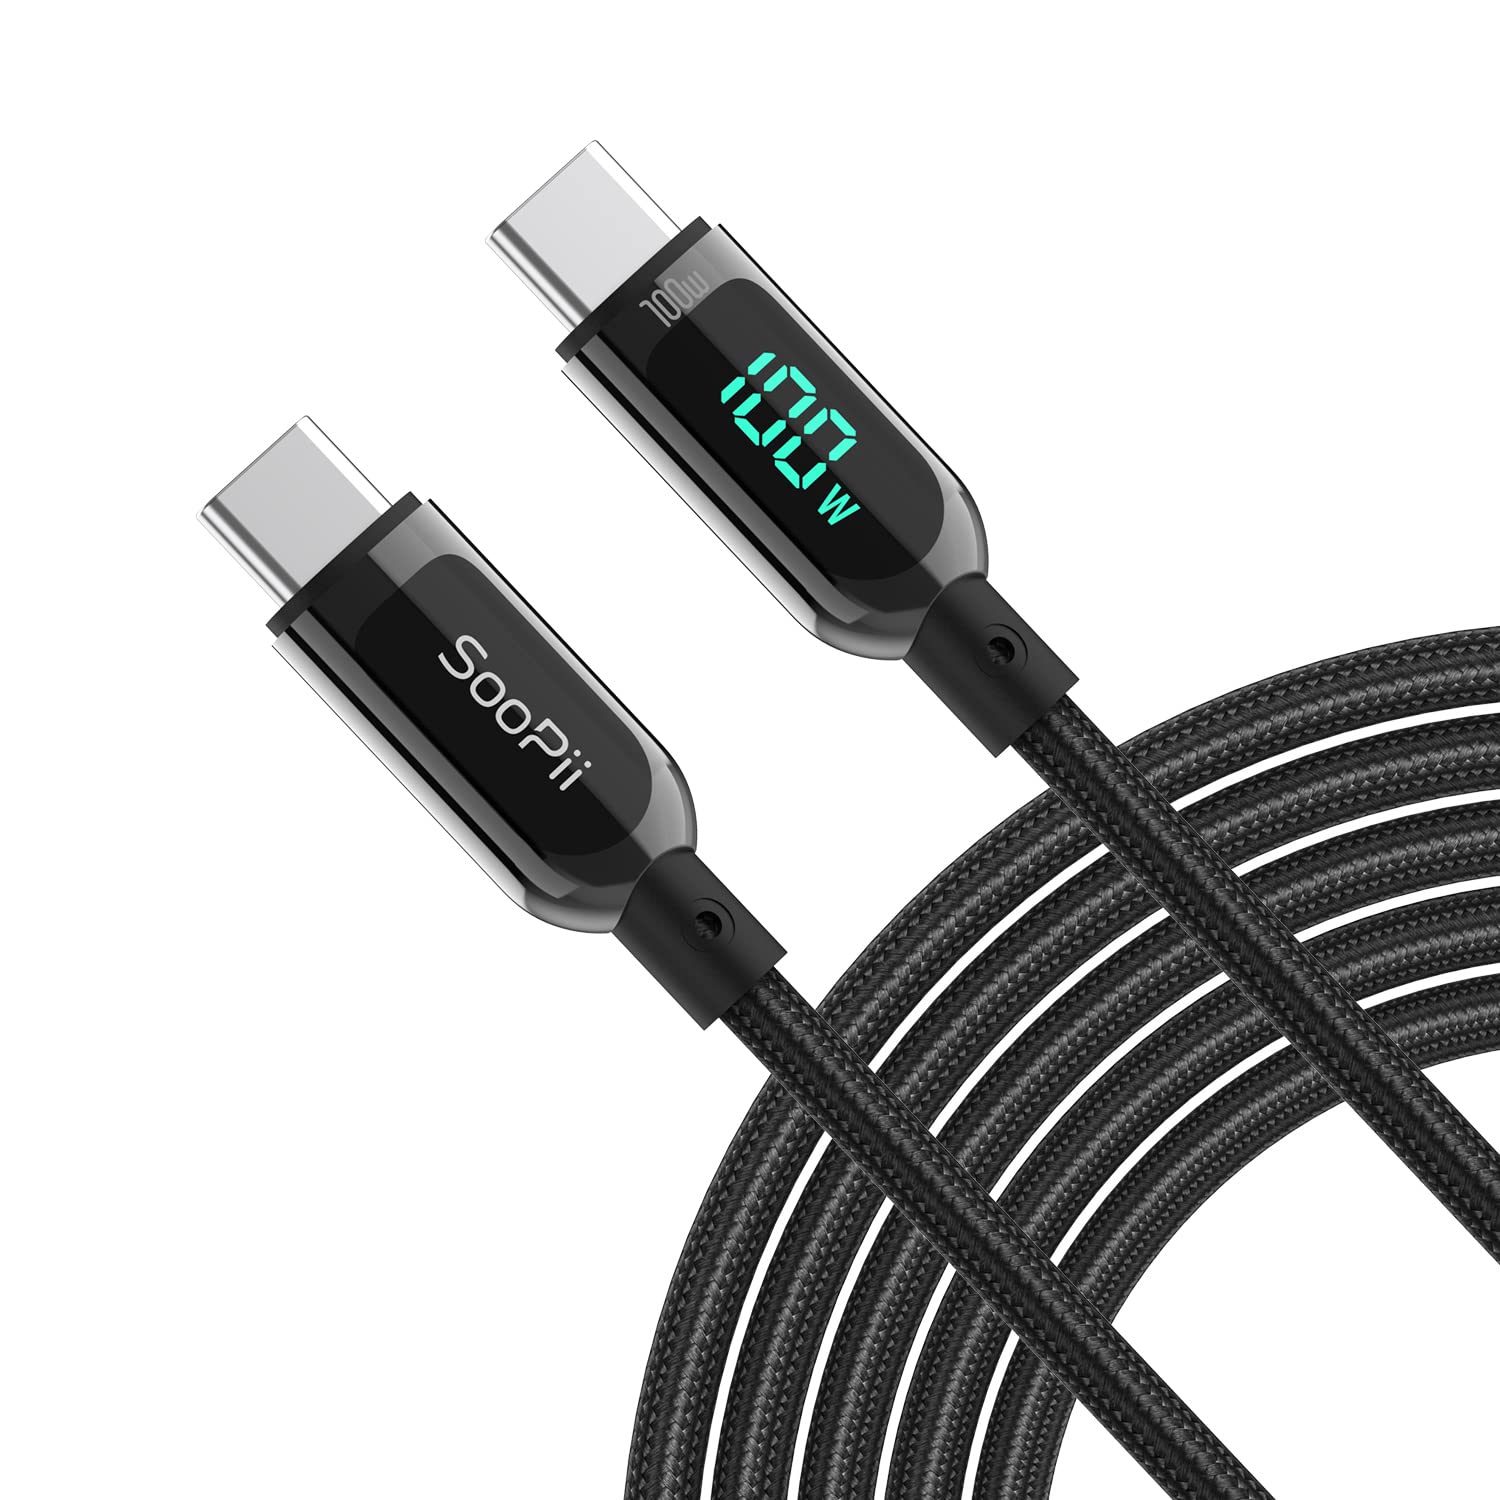 Cable Types and Differences, Understanding USB Type C: Cable Types,  Pitfalls and More.